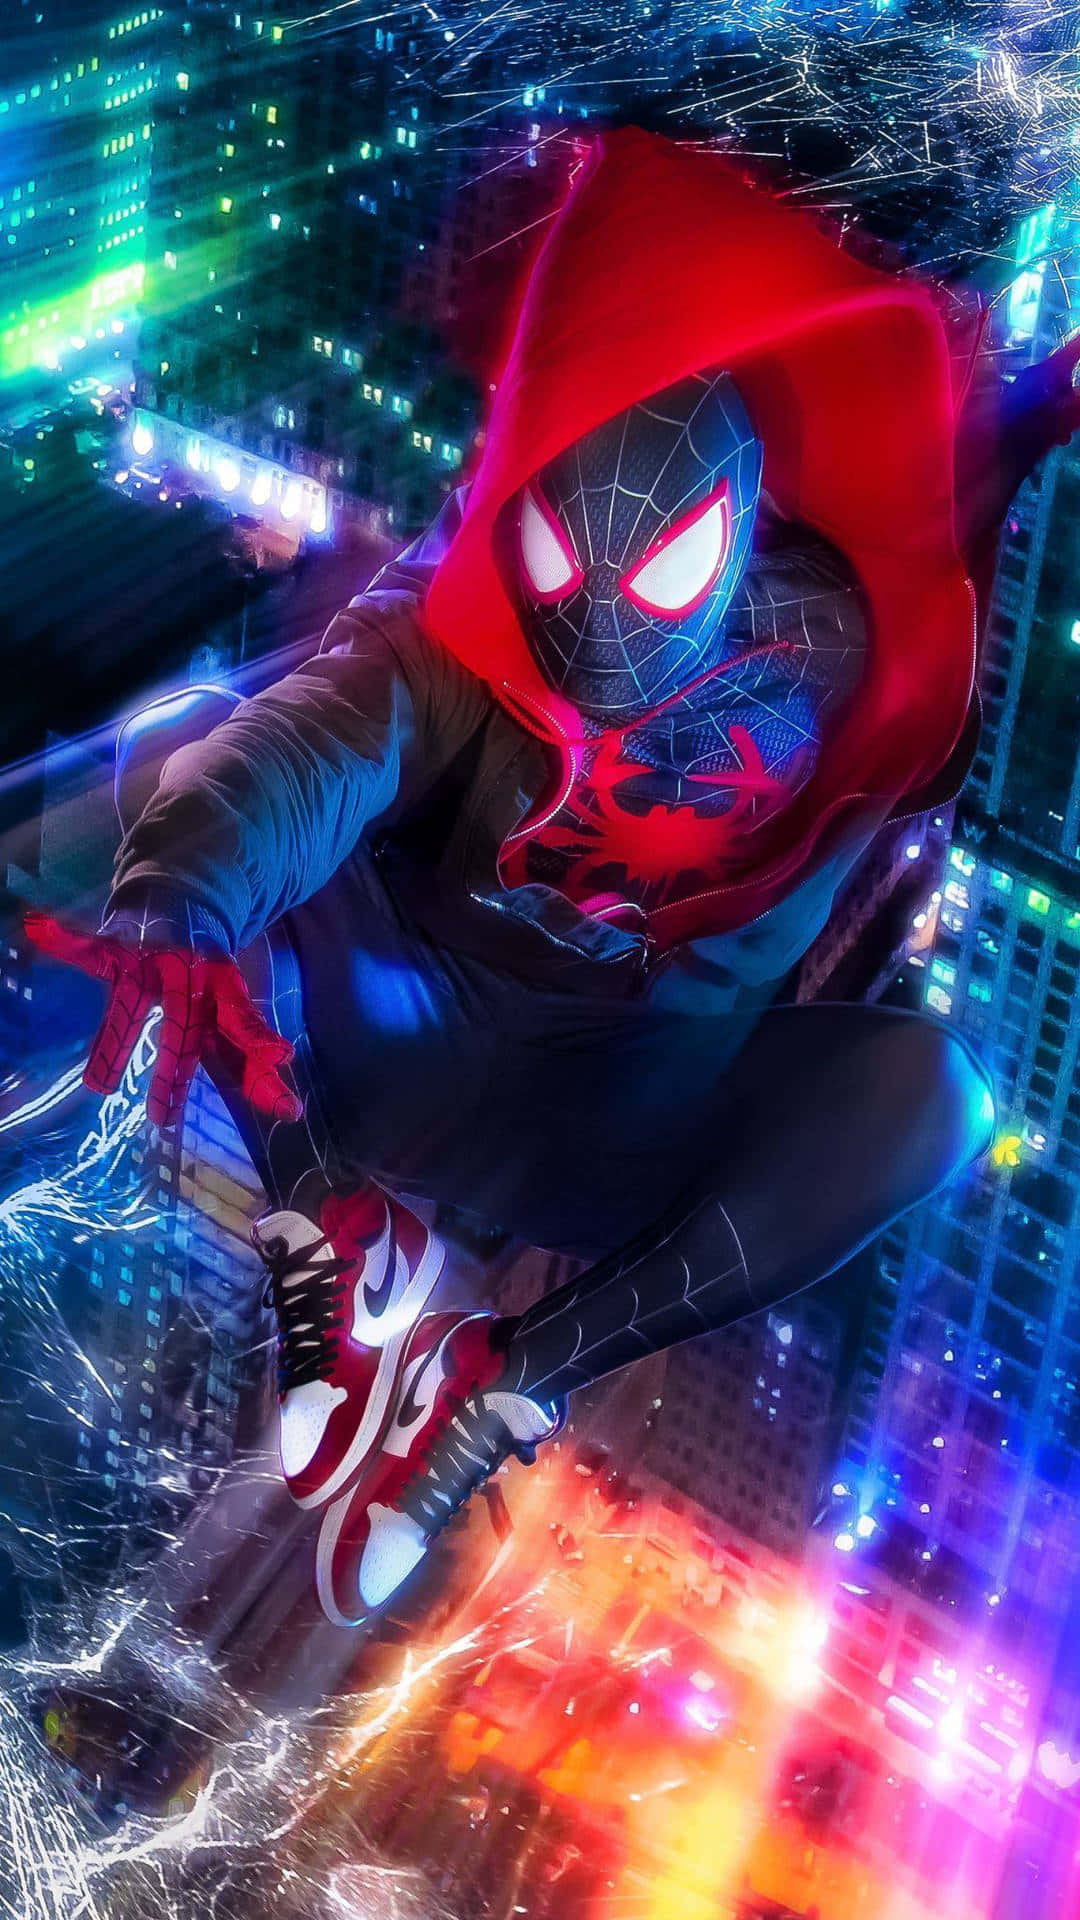 Spider Man Into The Spider Verse Poster